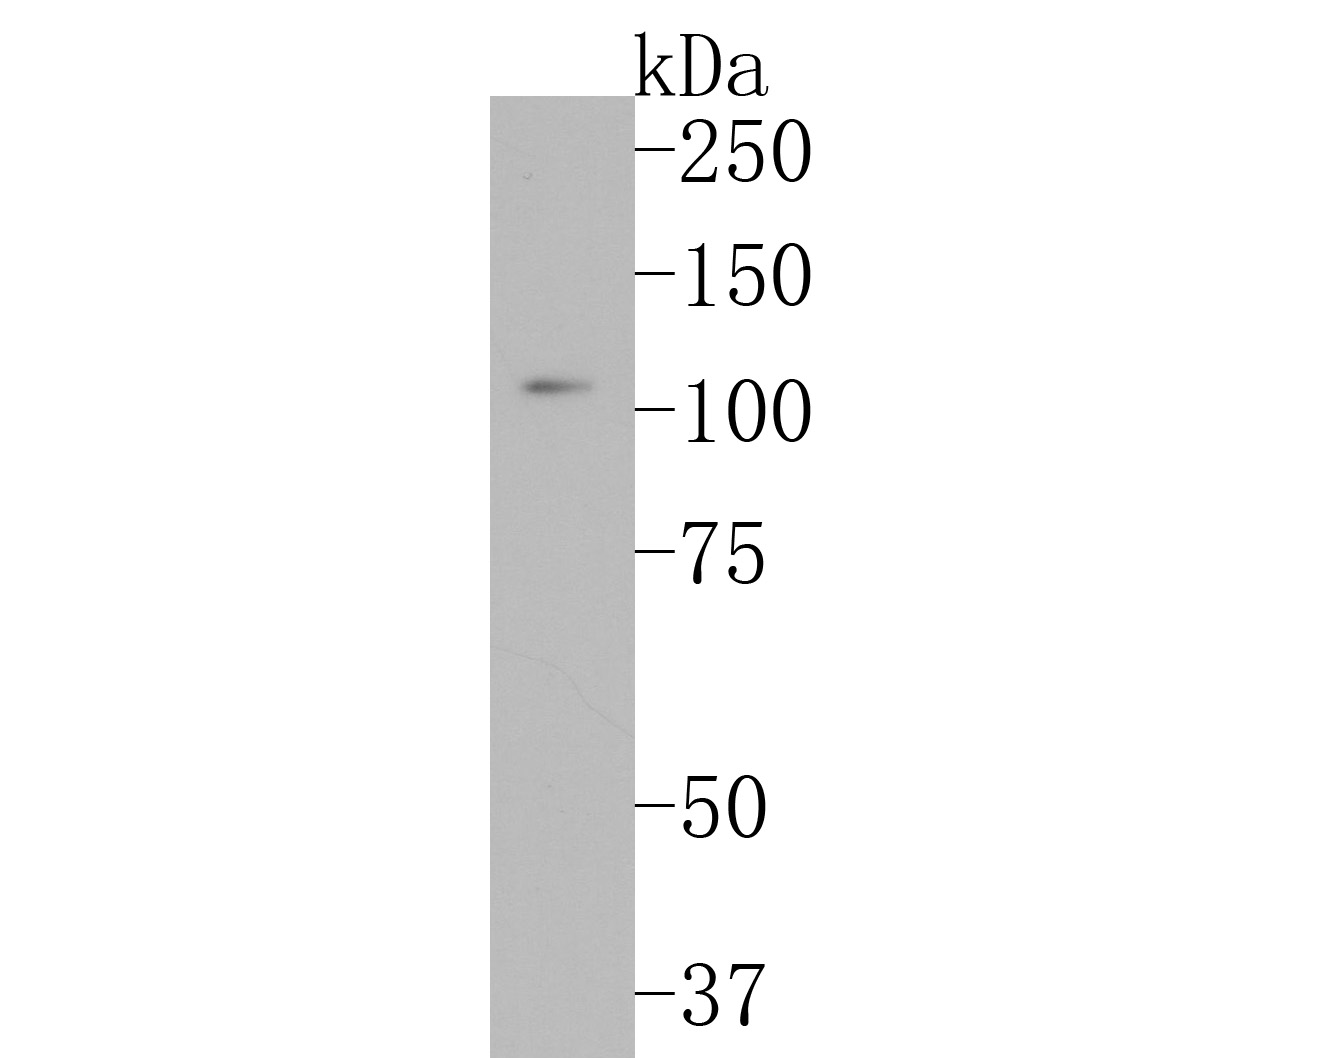 Western blot analysis of CD43 on K562 cell lysates. Proteins were transferred to a PVDF membrane and blocked with 5% BSA in PBS for 1 hour at room temperature. The primary antibody (EM1901-92, 1/200) was used in 5% BSA at room temperature for 2 hours. Goat Anti-Mouse IgG - HRP Secondary Antibody (HA1006) at 1:5,000 dilution was used for 1 hour at room temperature.